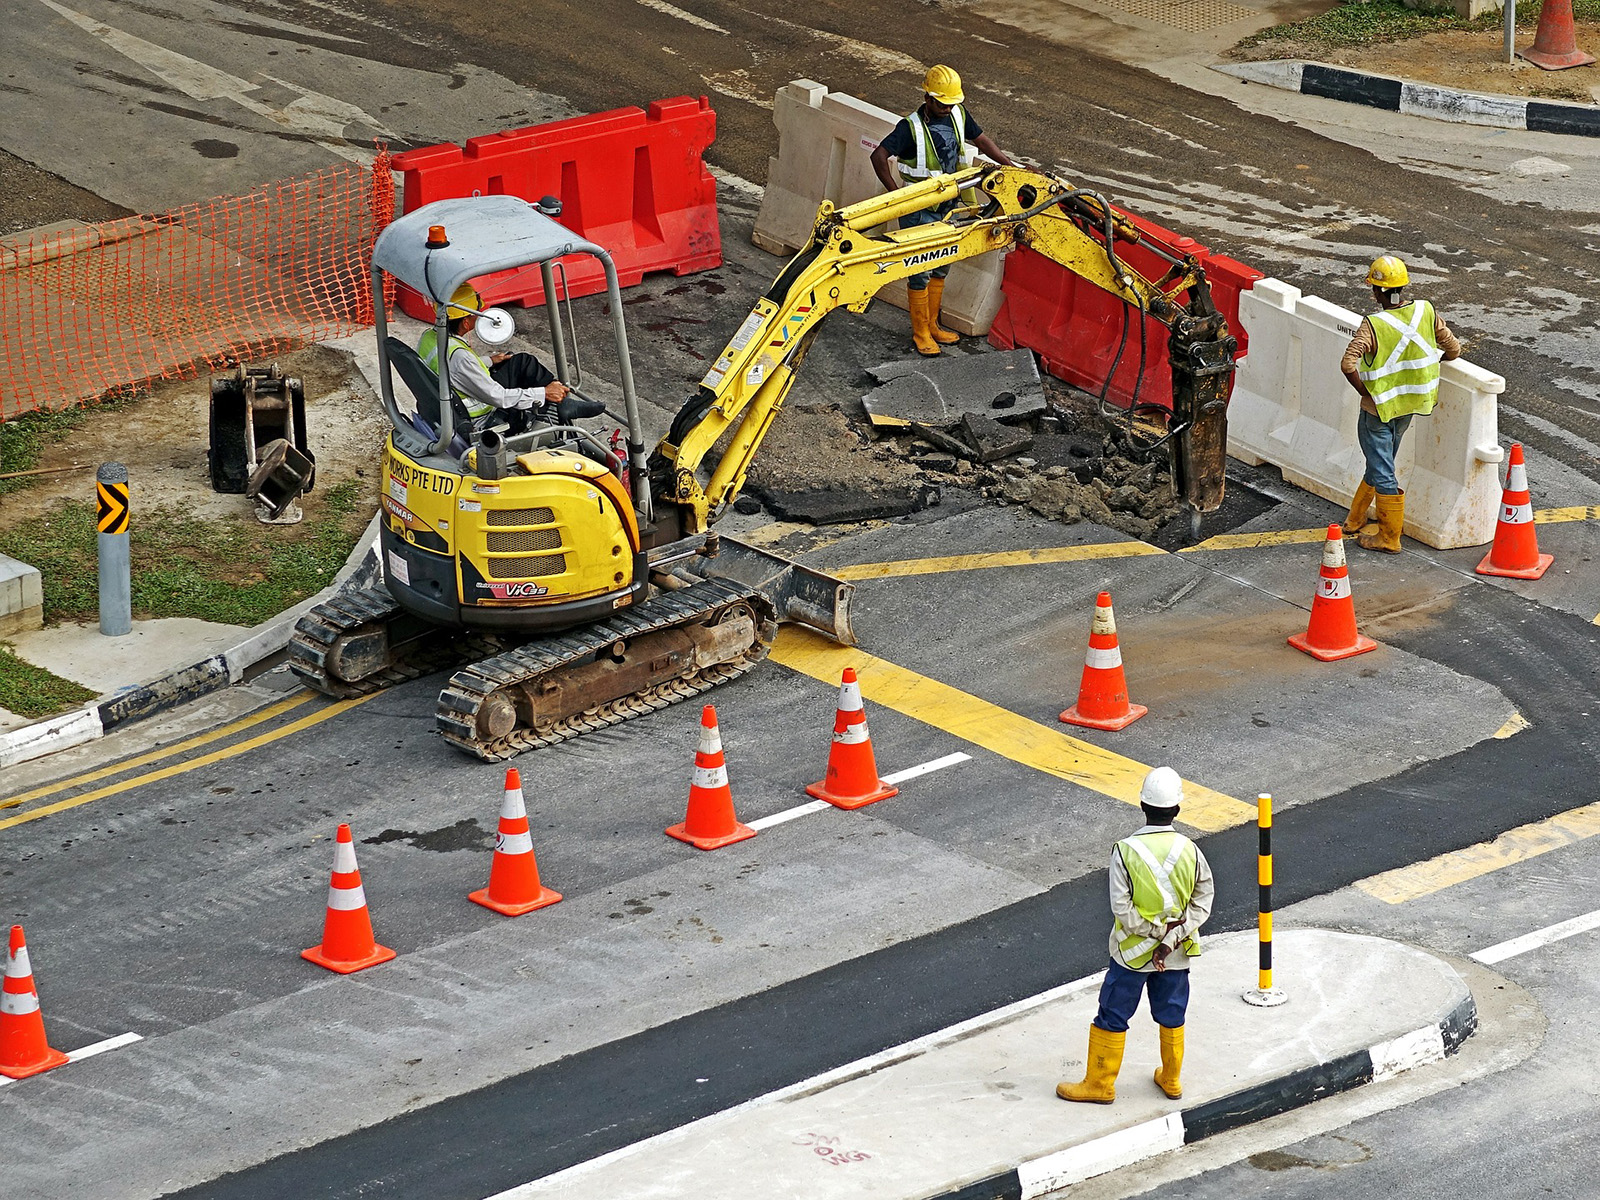 Construction site workers observing another working use a machine to dip up a road